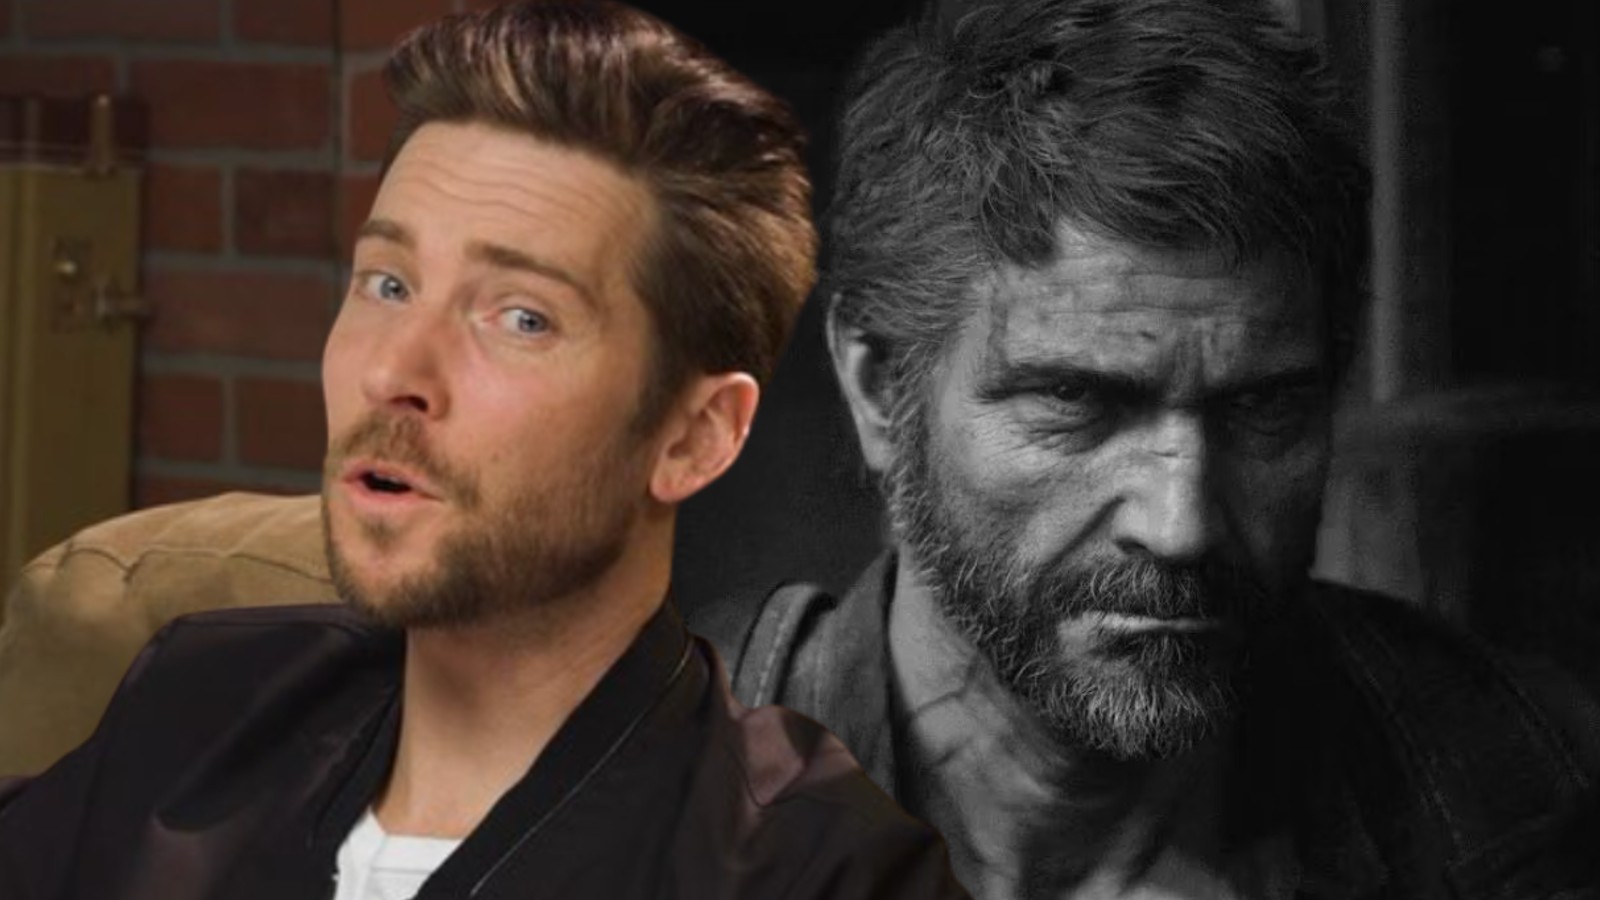 Who Voices Joel in The Last of Us?